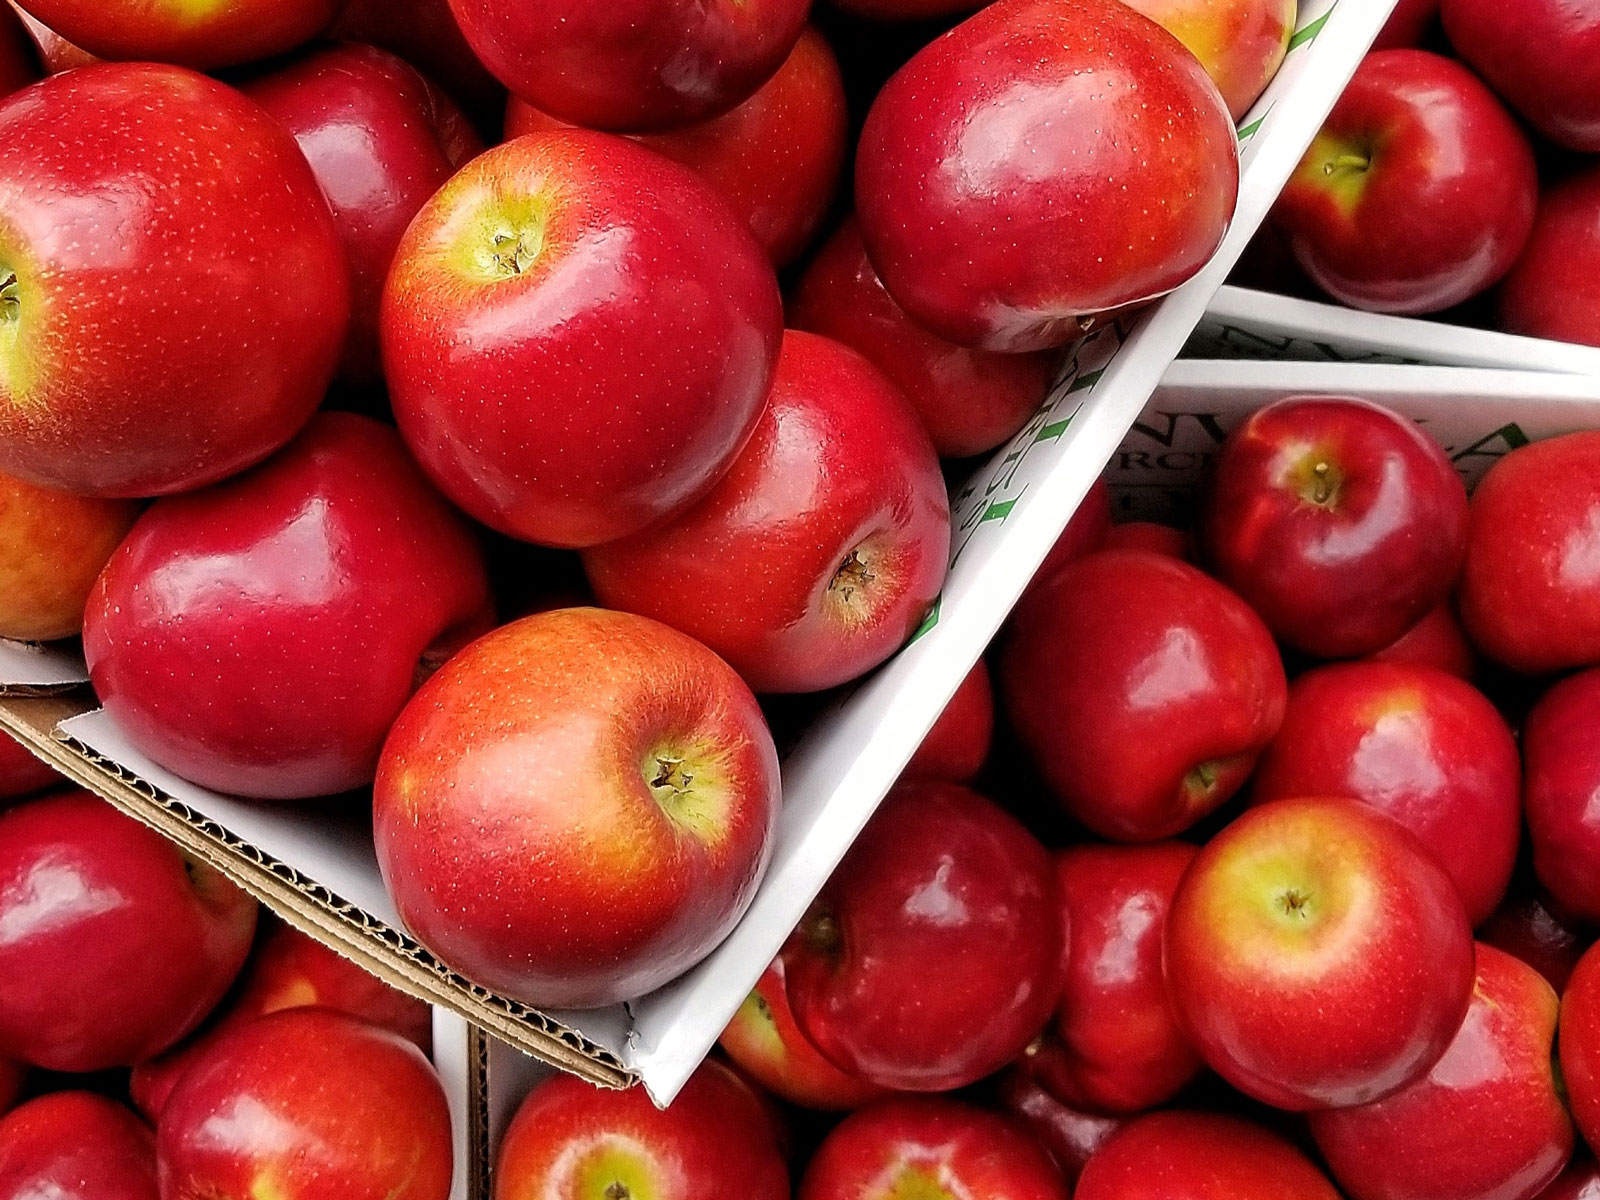 How to Store Apples to Keep Them Fresher Longer